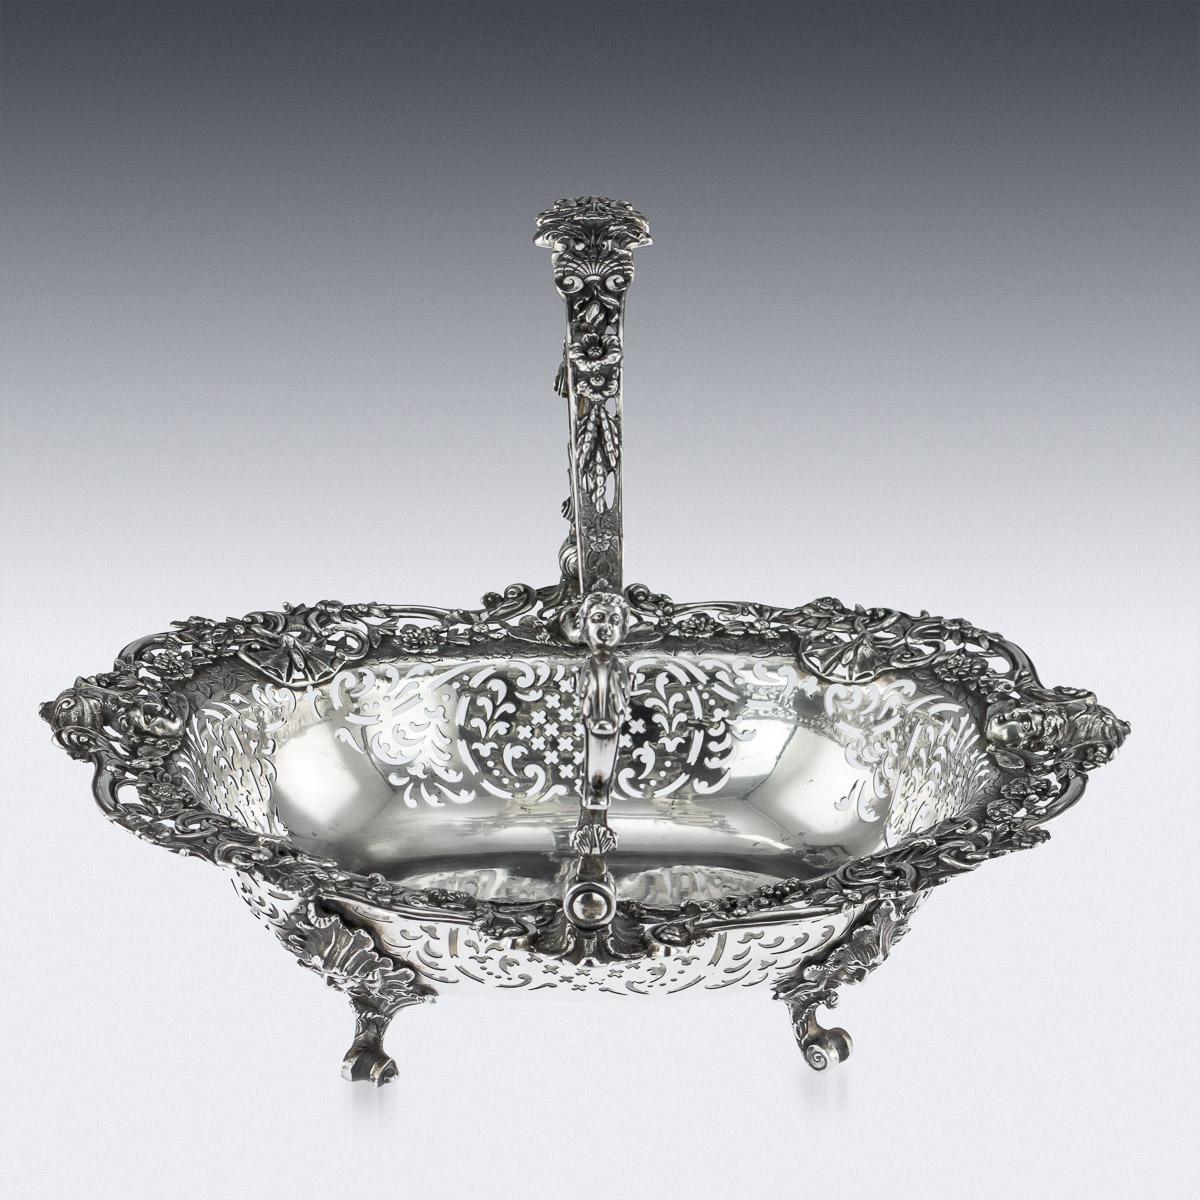 Antique 19th century Georgian solid silver basket, on four cast mask, ruffle and scroll feet, the shaped oval body pierced along the sides and applied with a border of cast and pierced winged masks, moths, festoons, flowers and foliage among